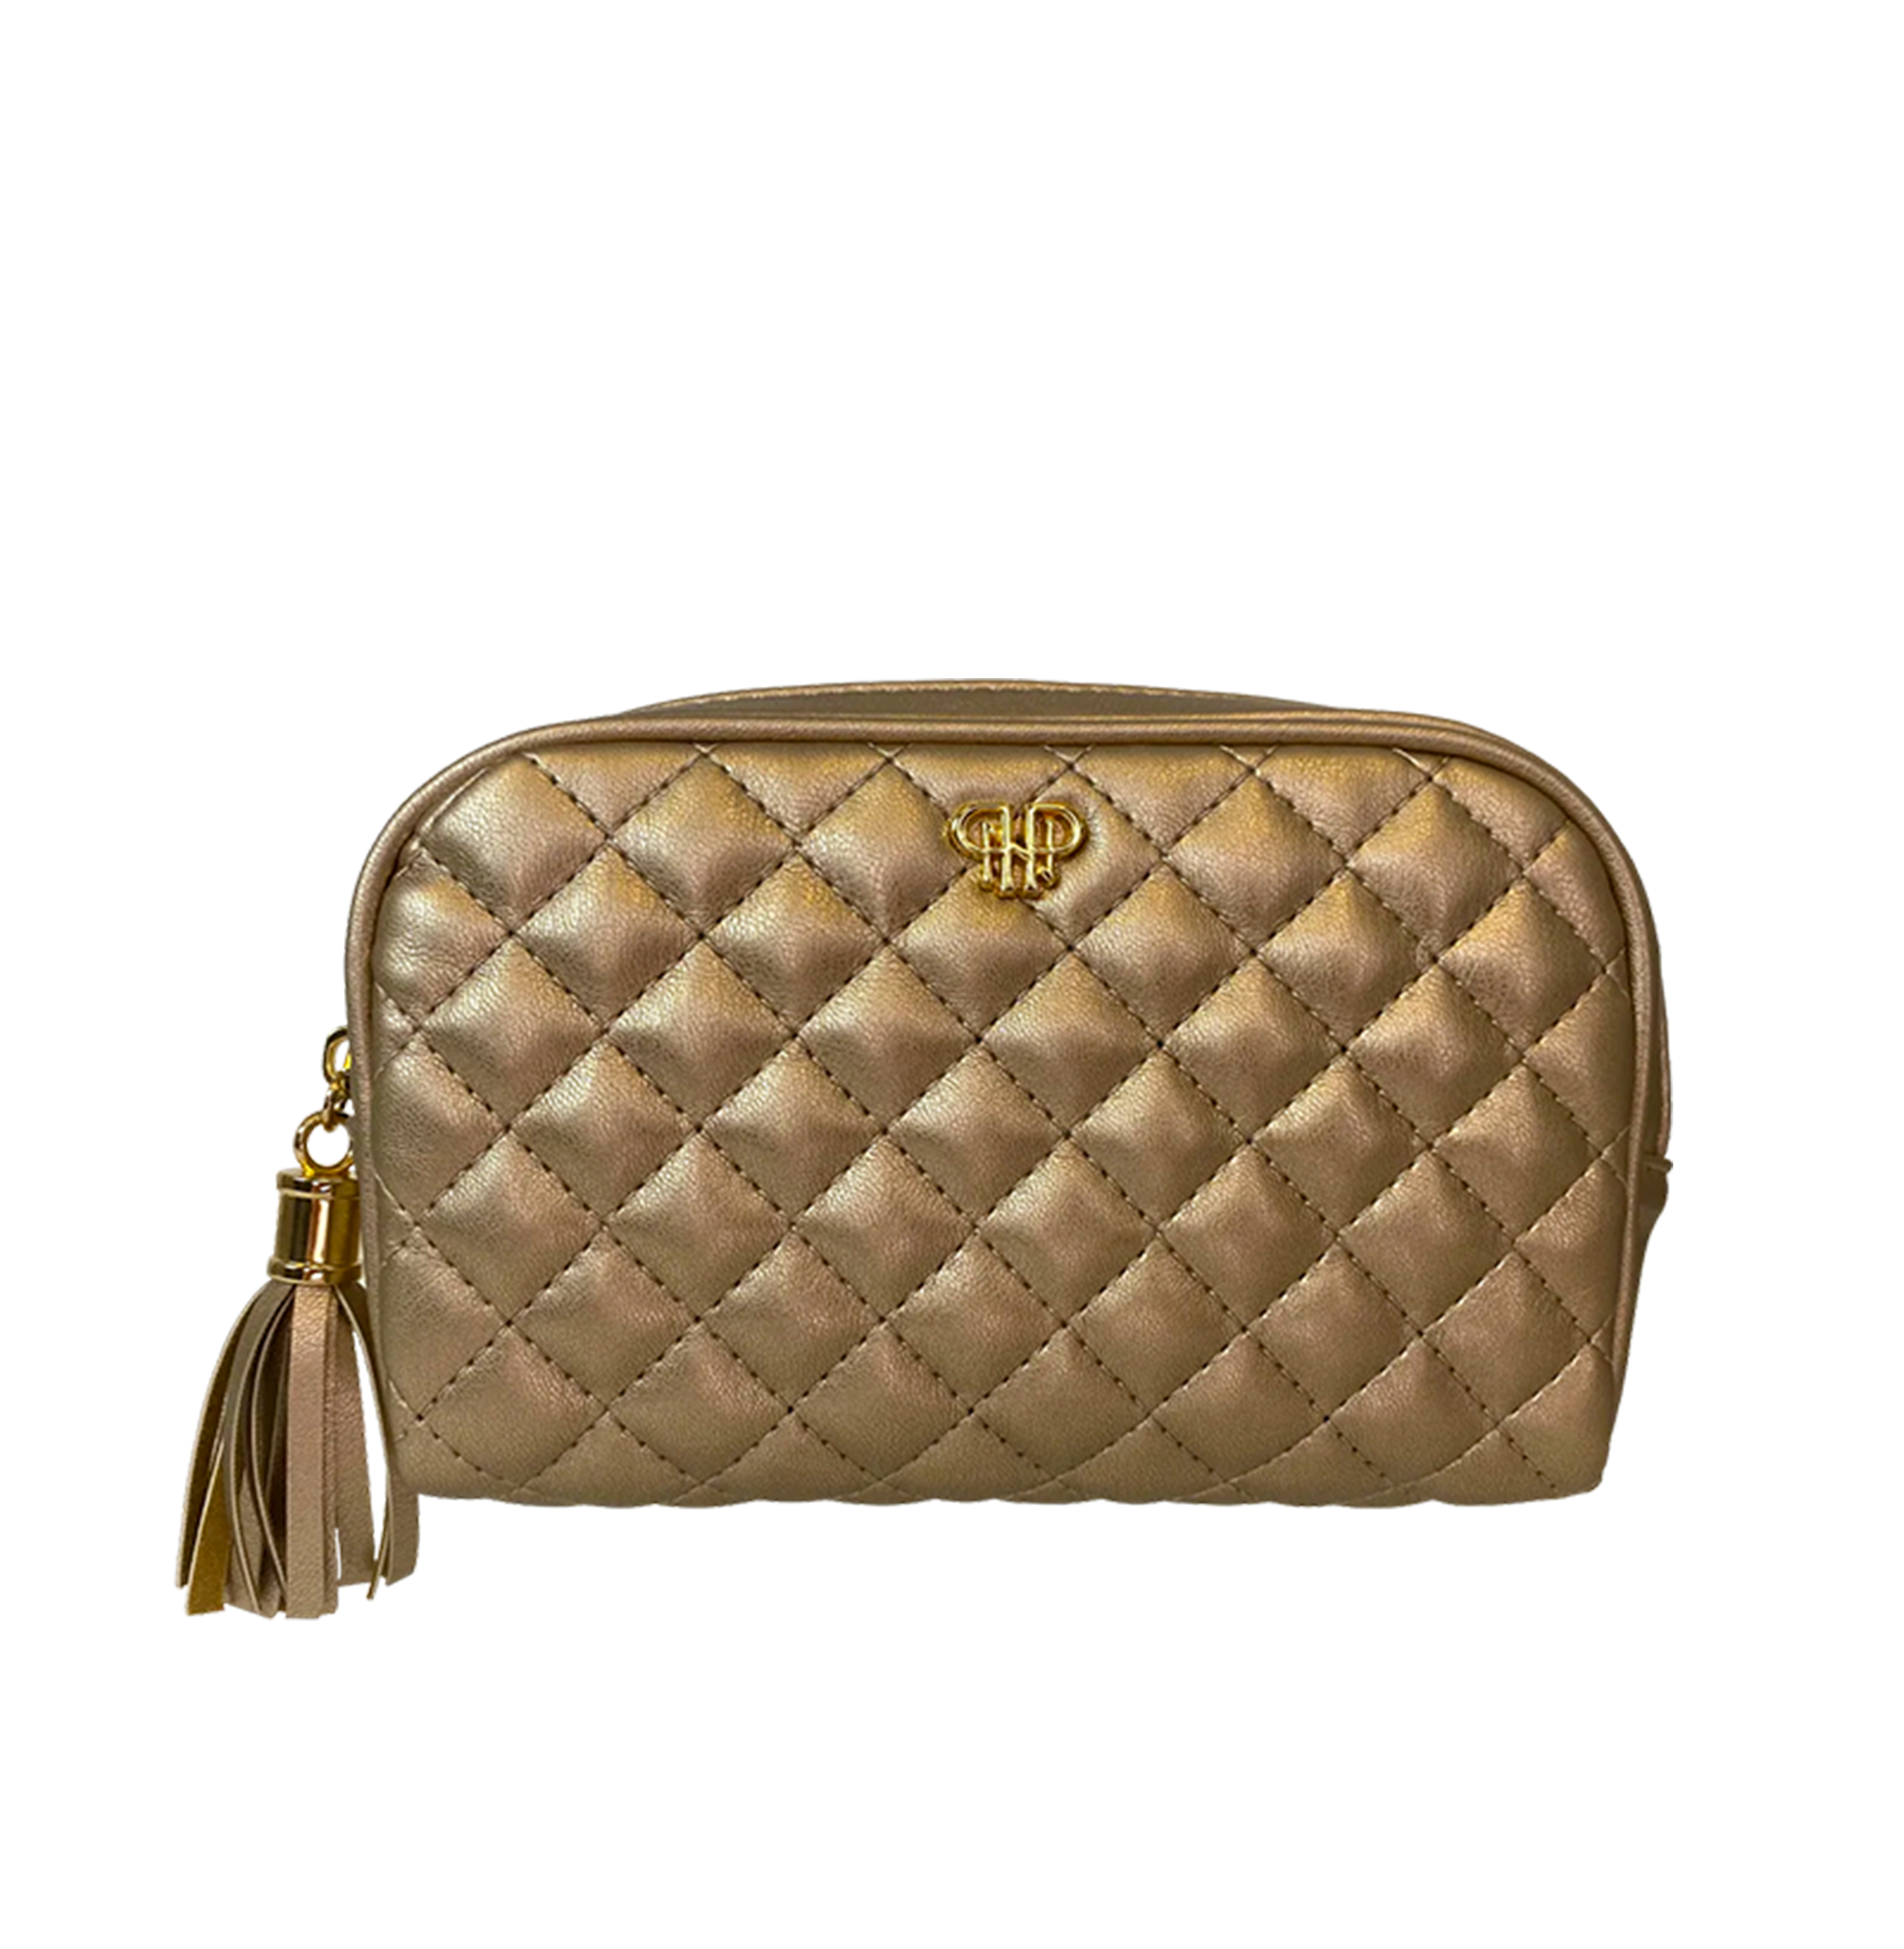 Small Makeup Bag - Gold Quilted